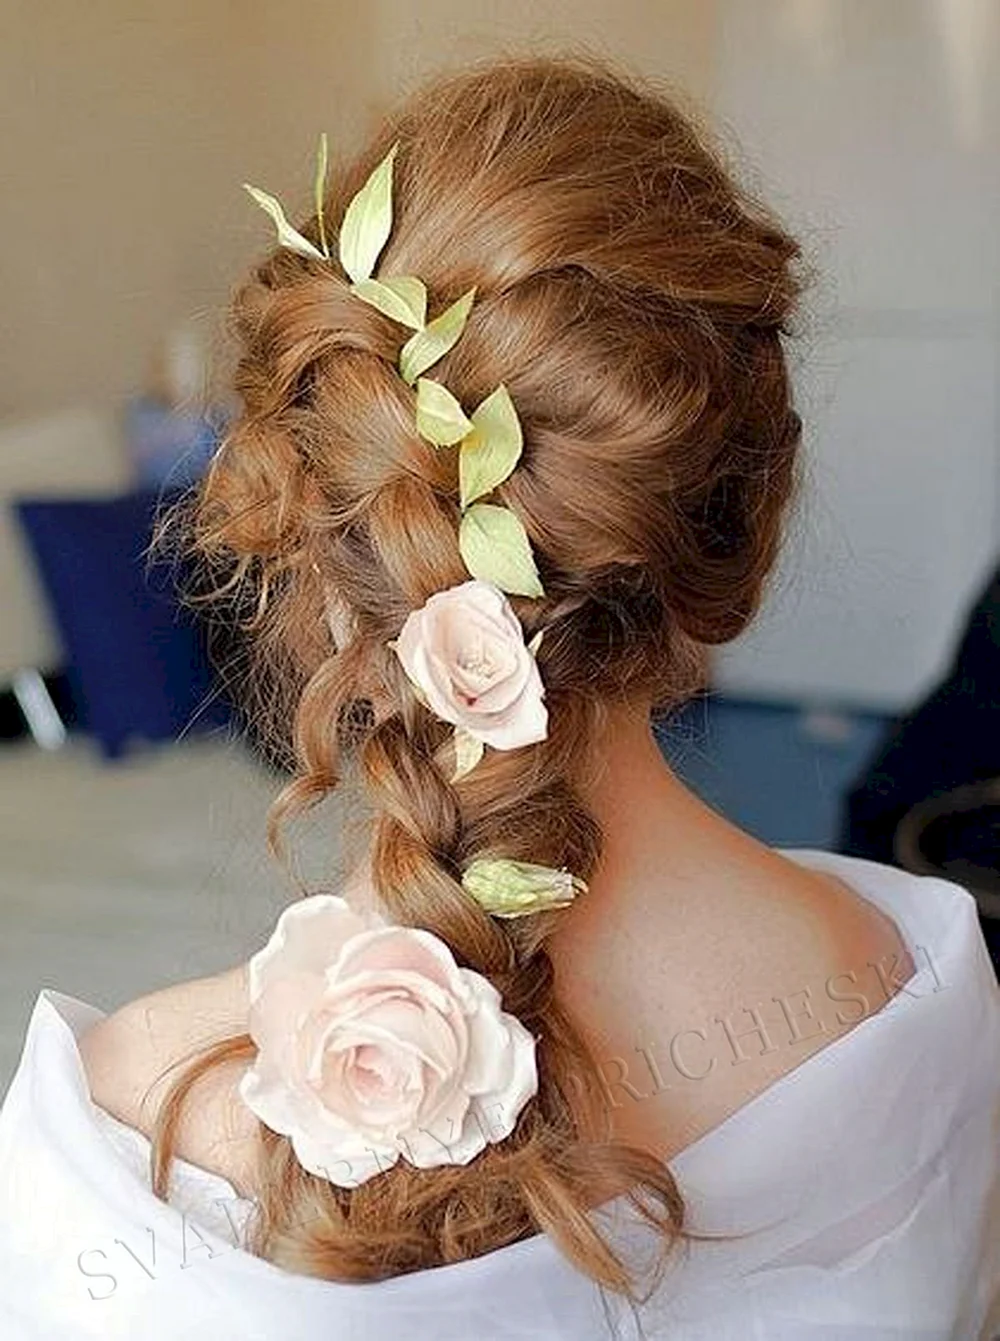 Hair buns with beautiful decoration